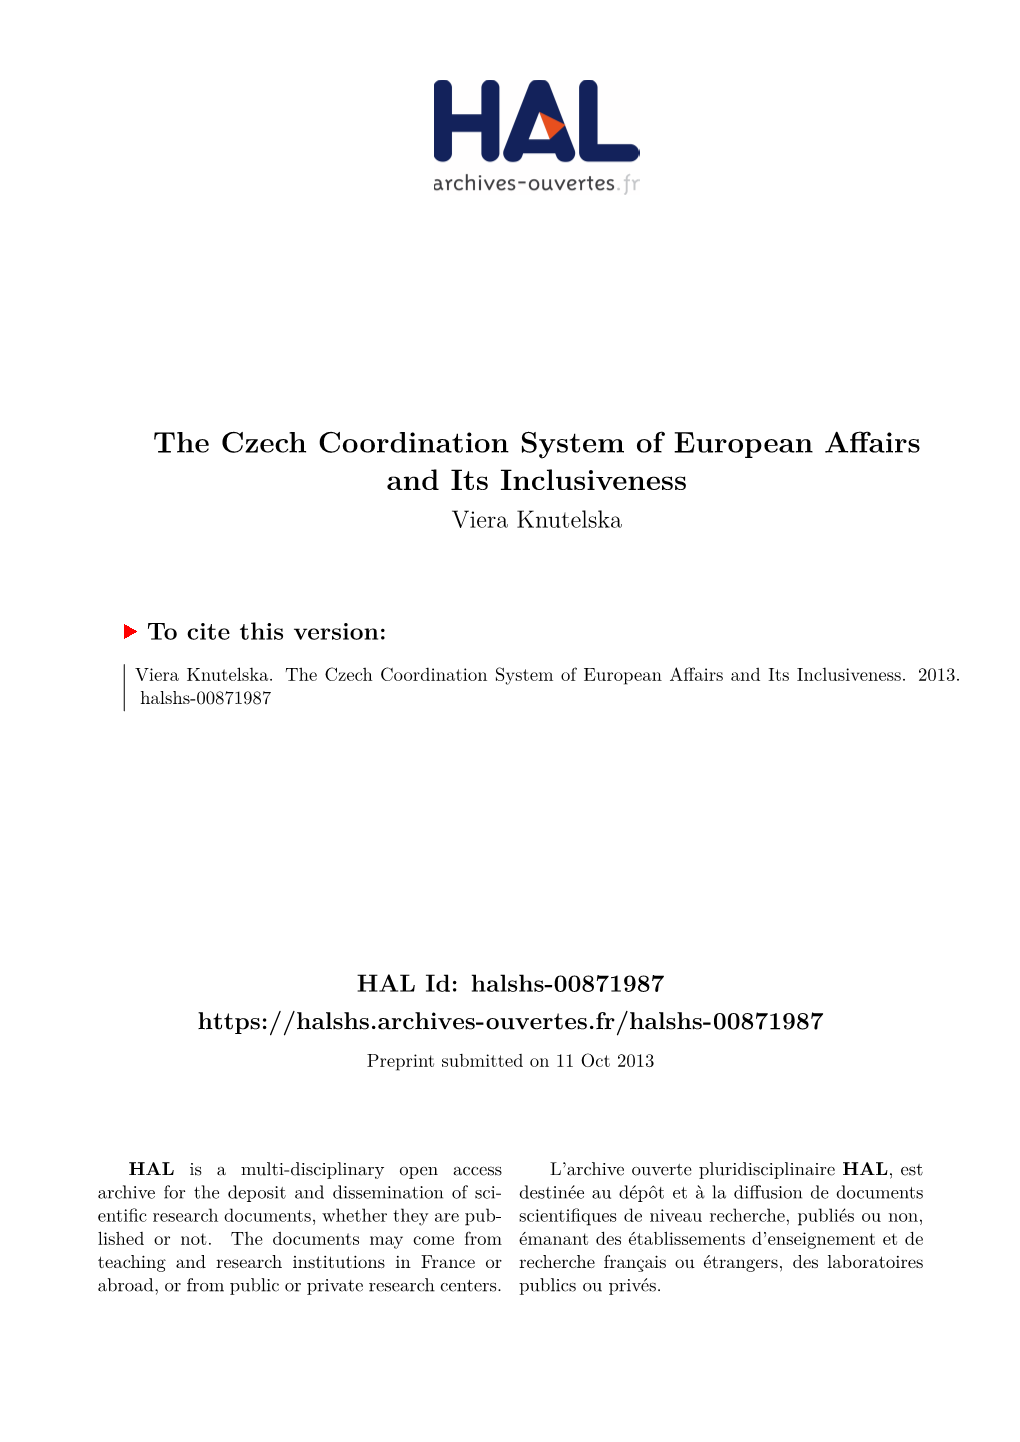 The Czech Coordination System of European Affairs and Its Inclusiveness Viera Knutelska